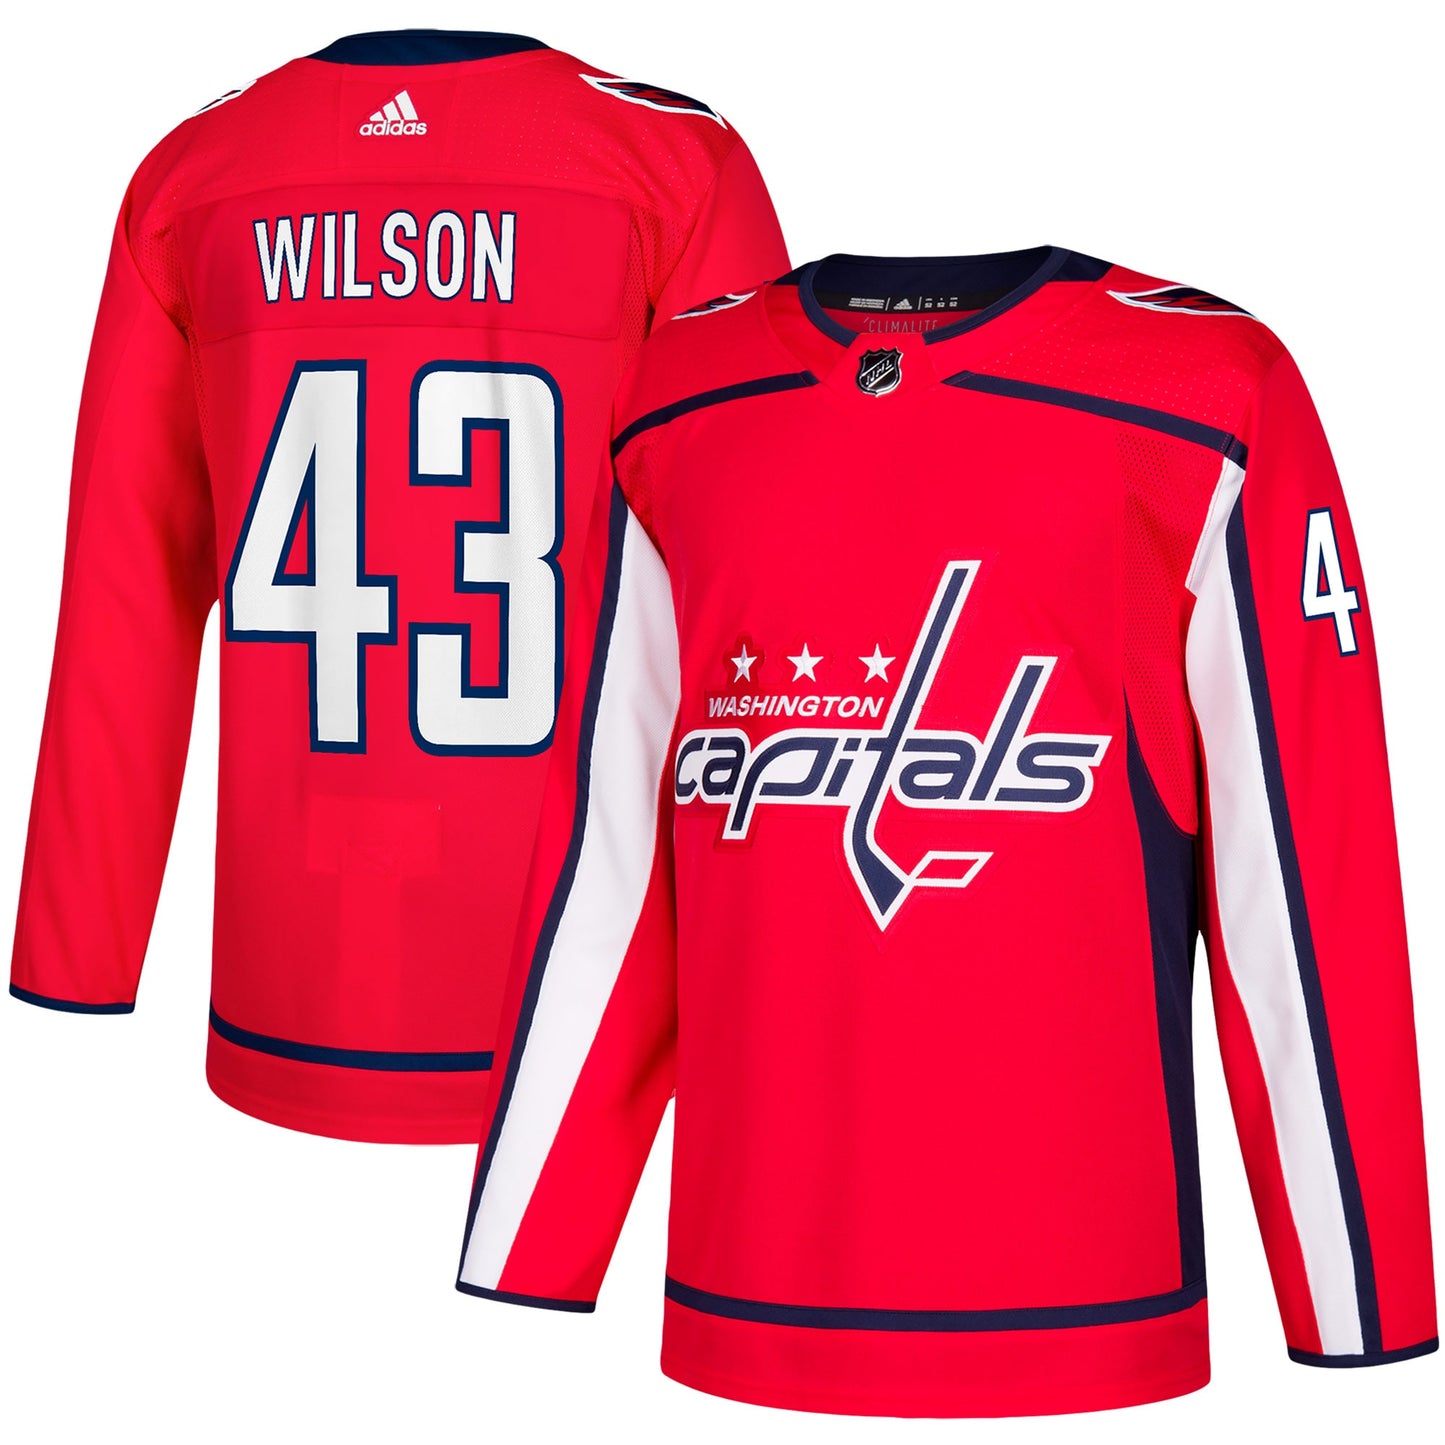 Tom Wilson Washington Capitals adidas Home Authentic Player Jersey - Red